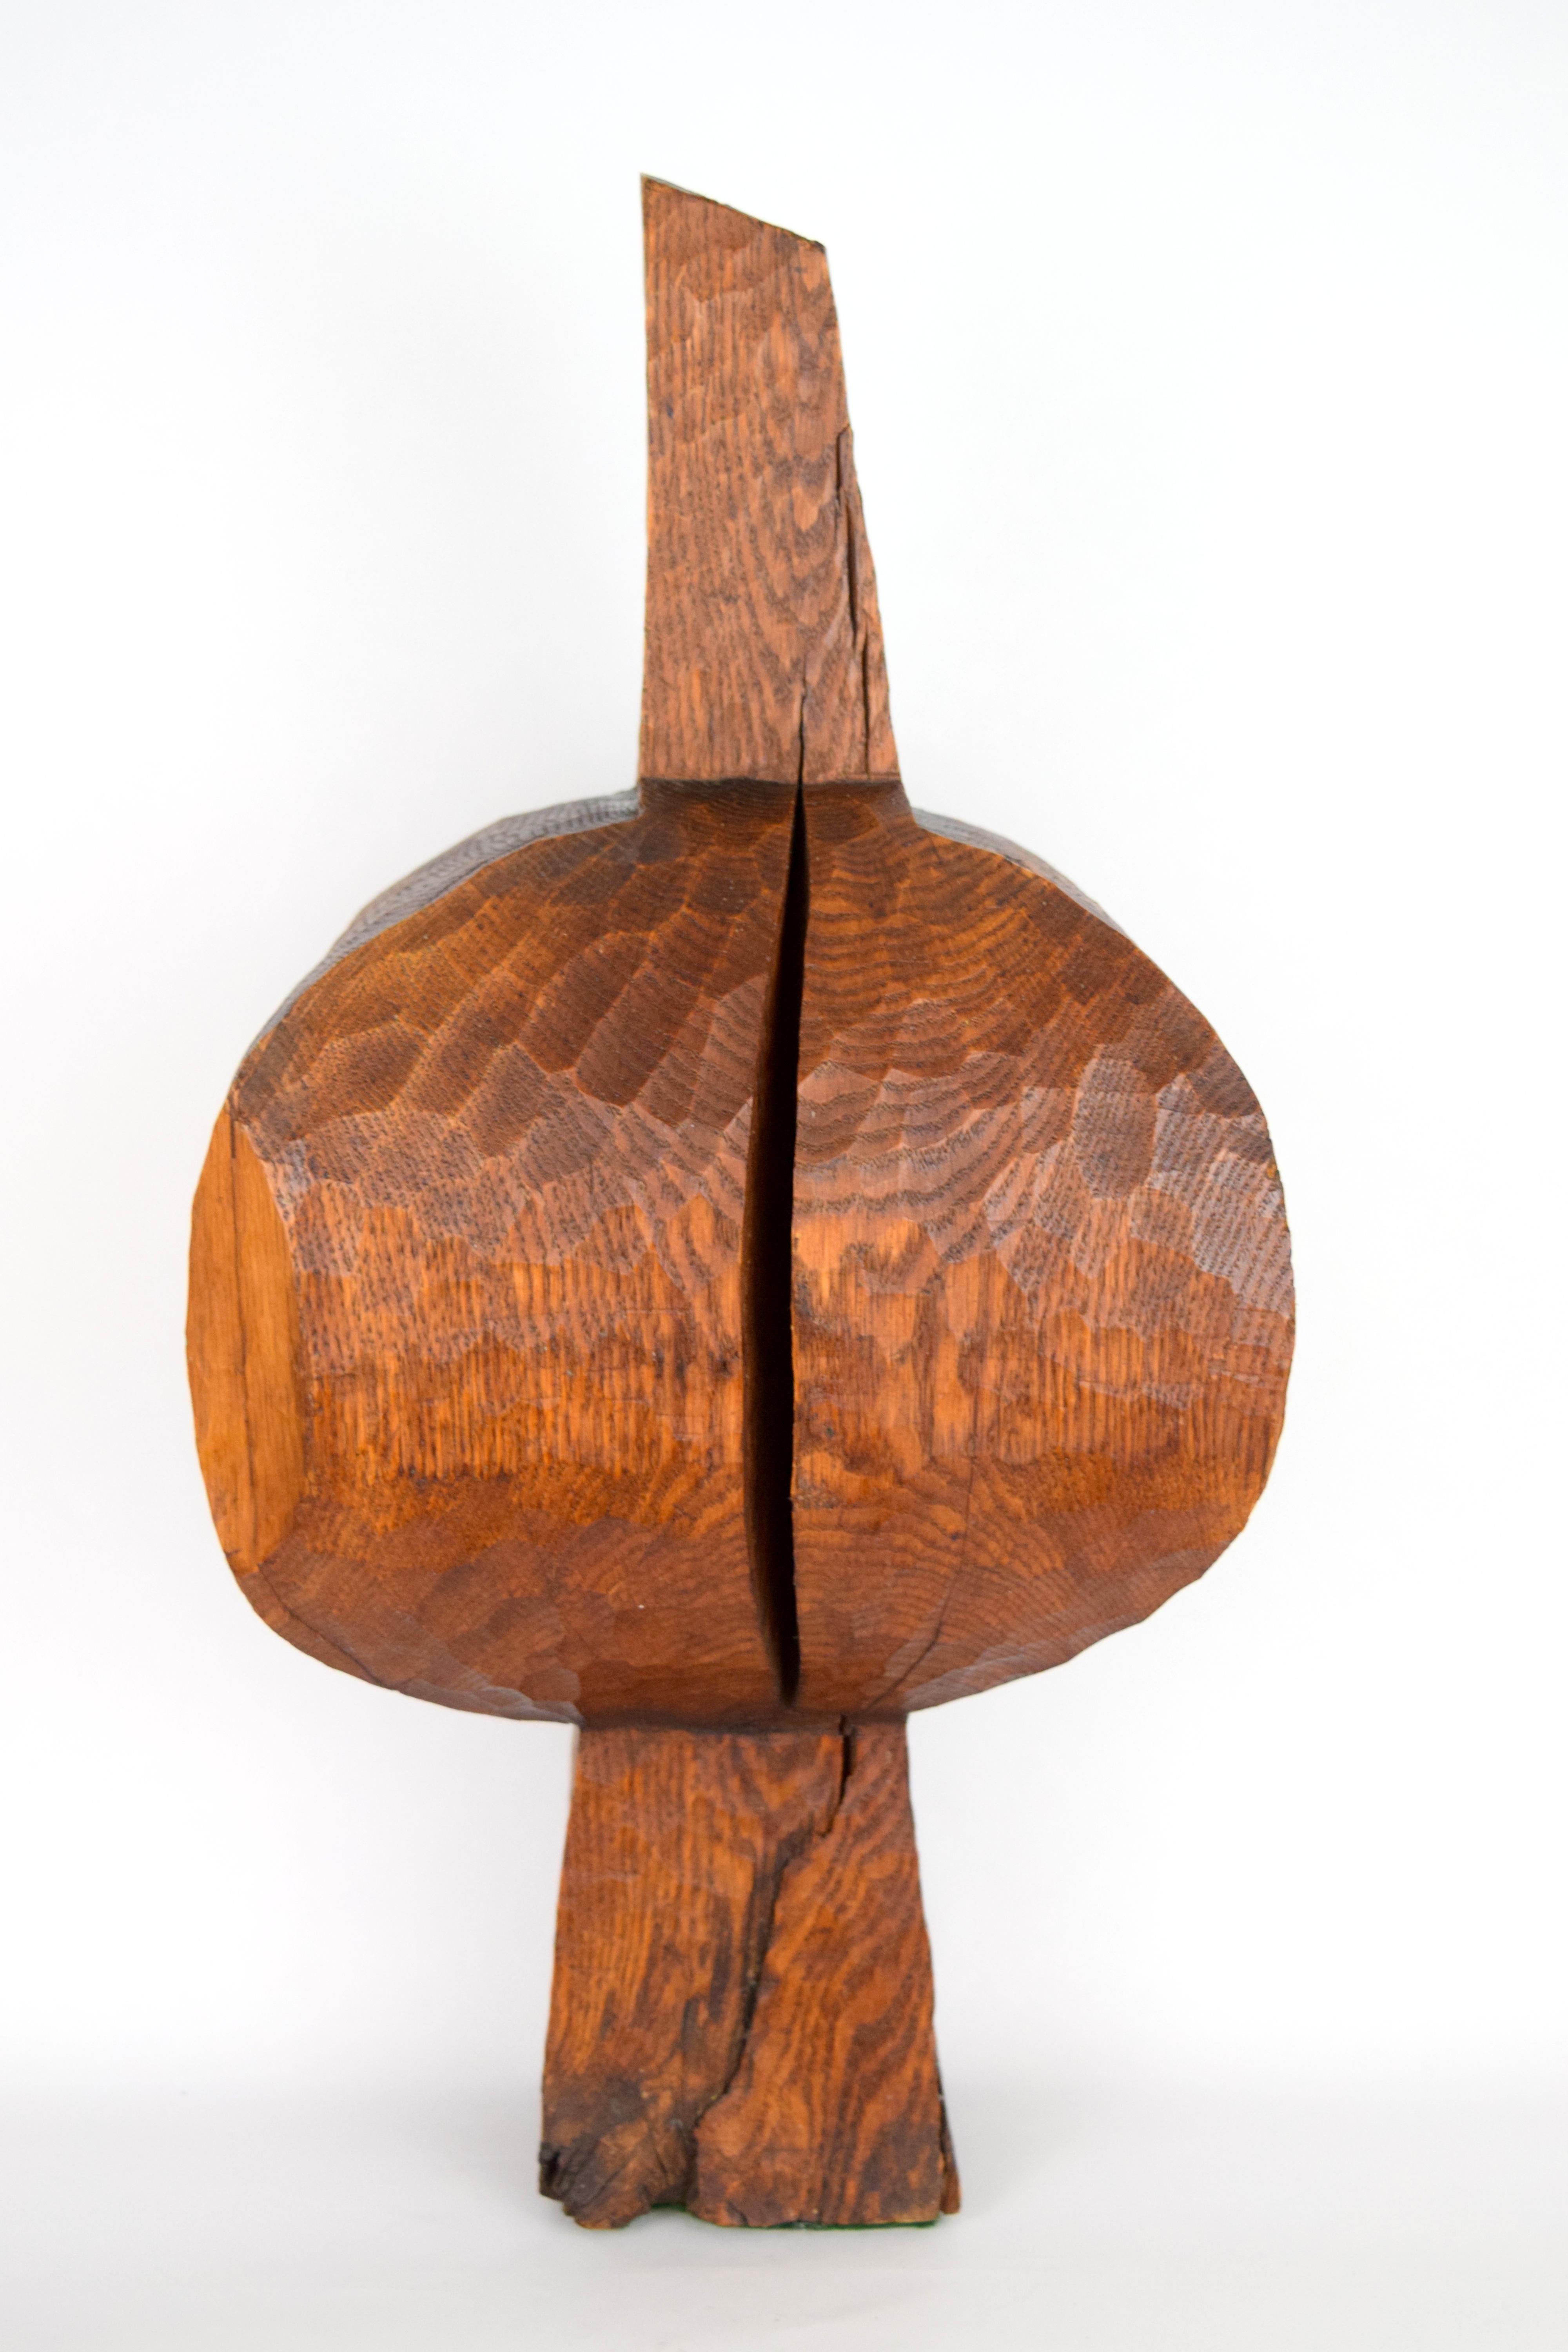 Fascinating wooden sculpture in bulbous form by American artist Hugh Townley (1923-2008). Lovely form and texture with chiseled surface and natural splits in wood. Townleys work exhibited at numerous Museums including MOMA, LACMA, Art Institute of